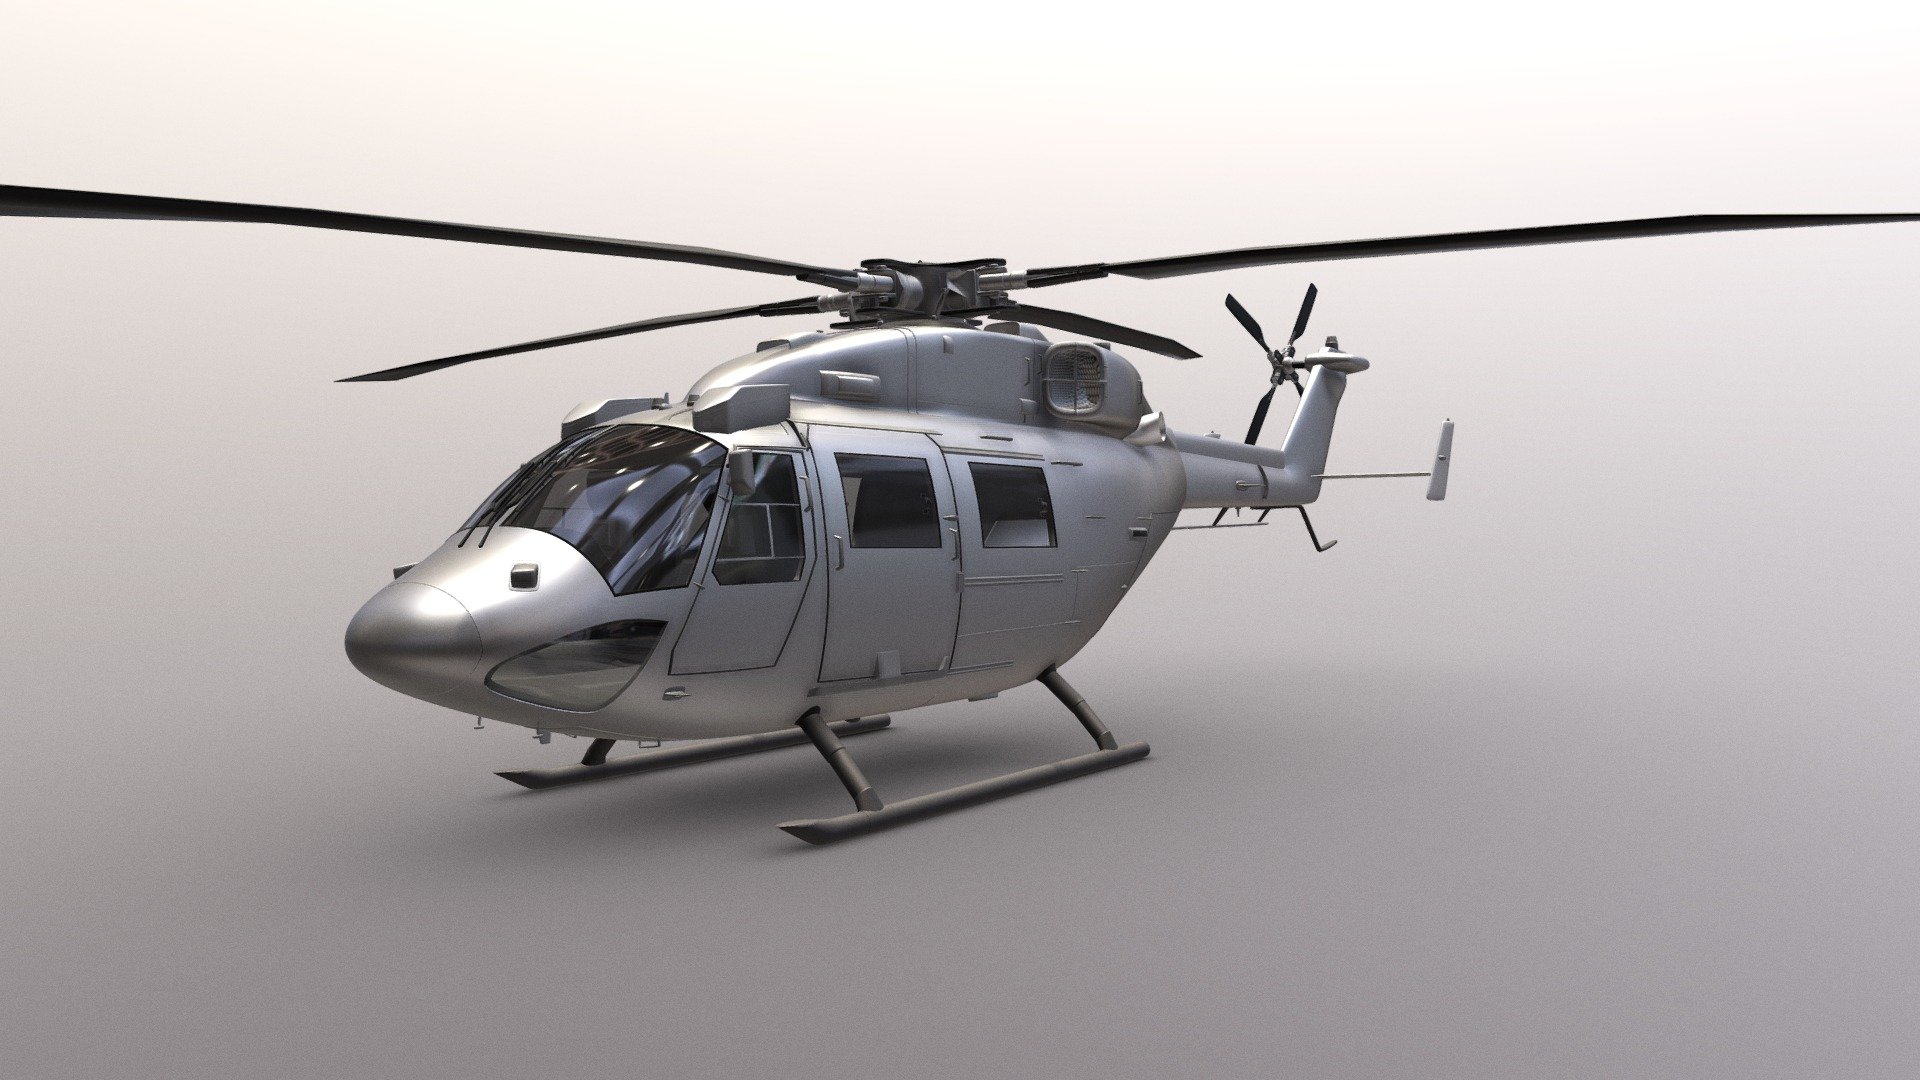 ALH Dhruv Helicopter - 3D model by Ankur (@anx450z) [6c9ad9a] - Sketchfab